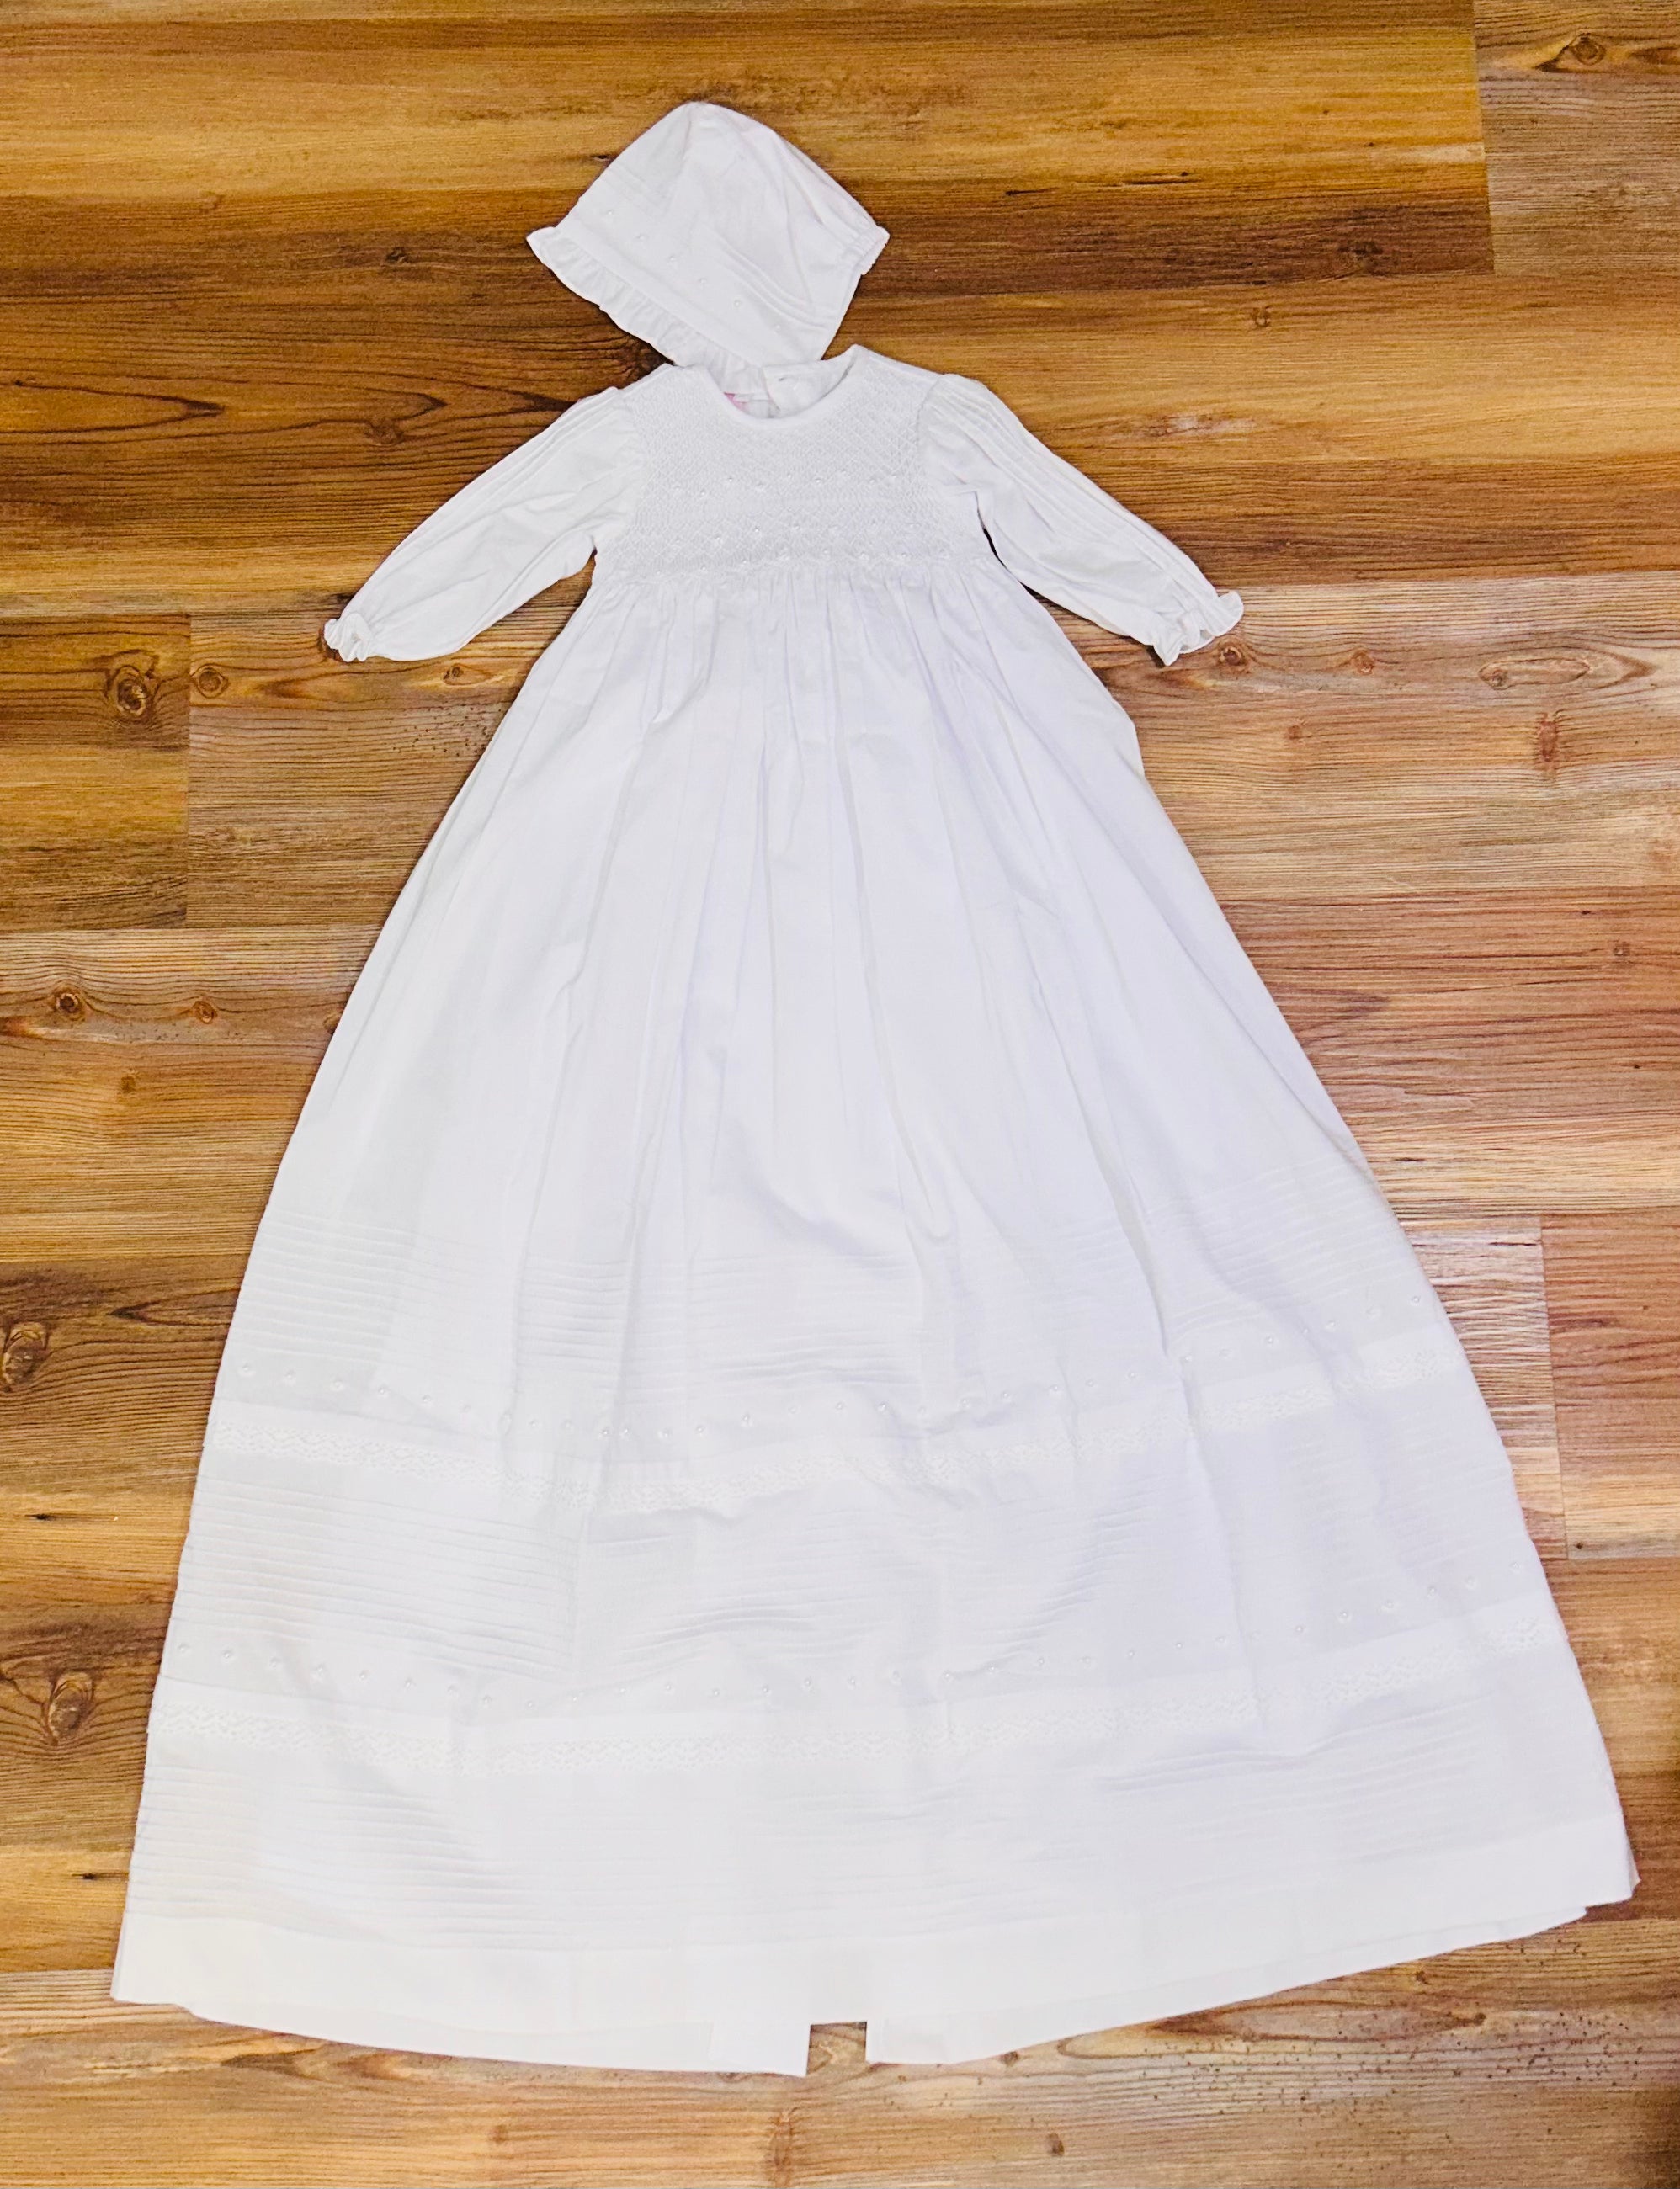 White Christening Gown with Bonnet